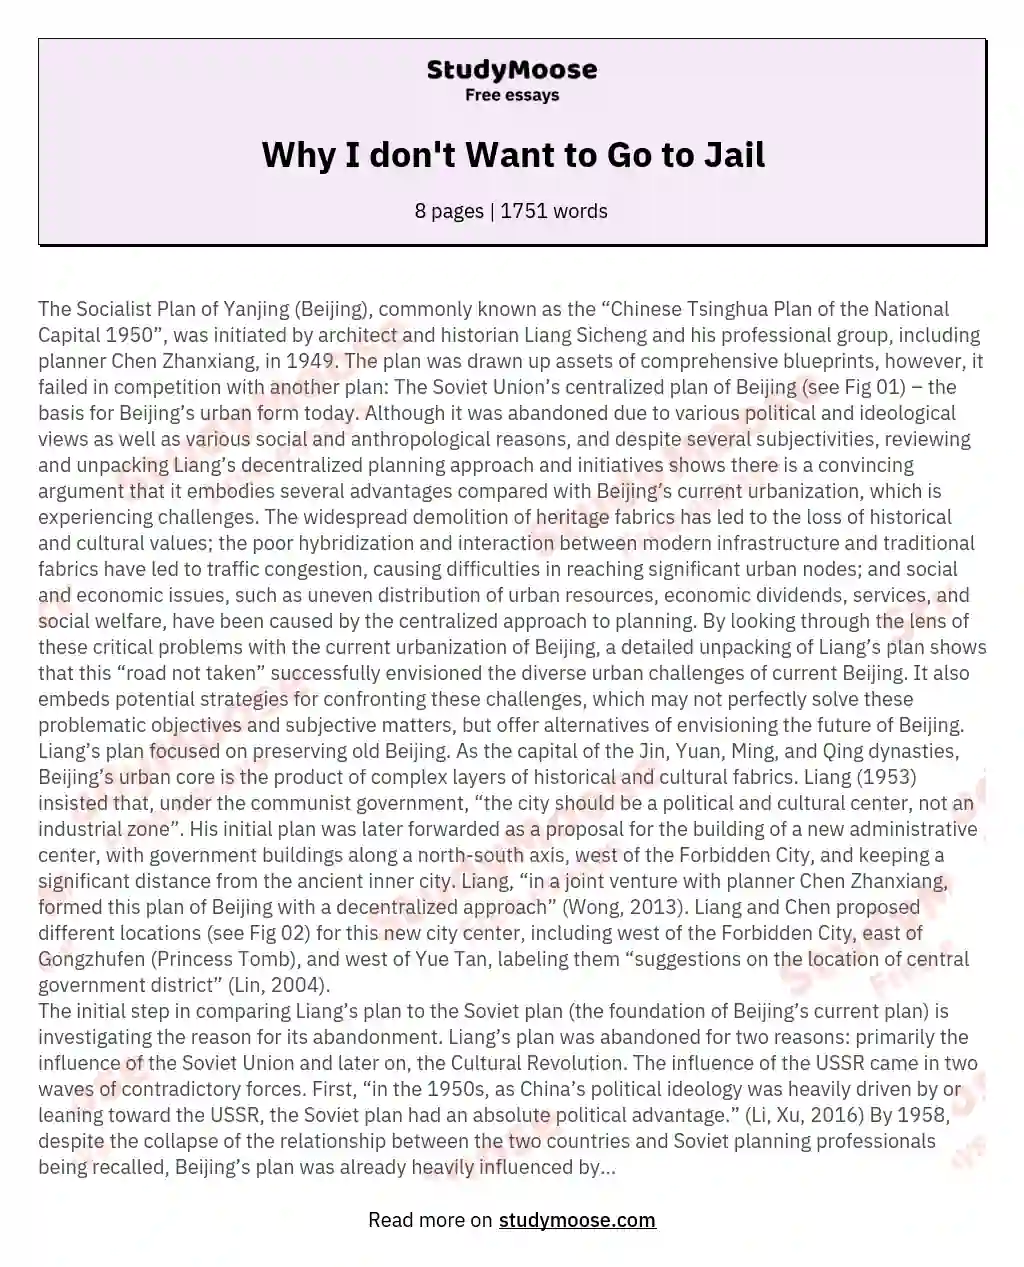 Why I don't Want to Go to Jail essay